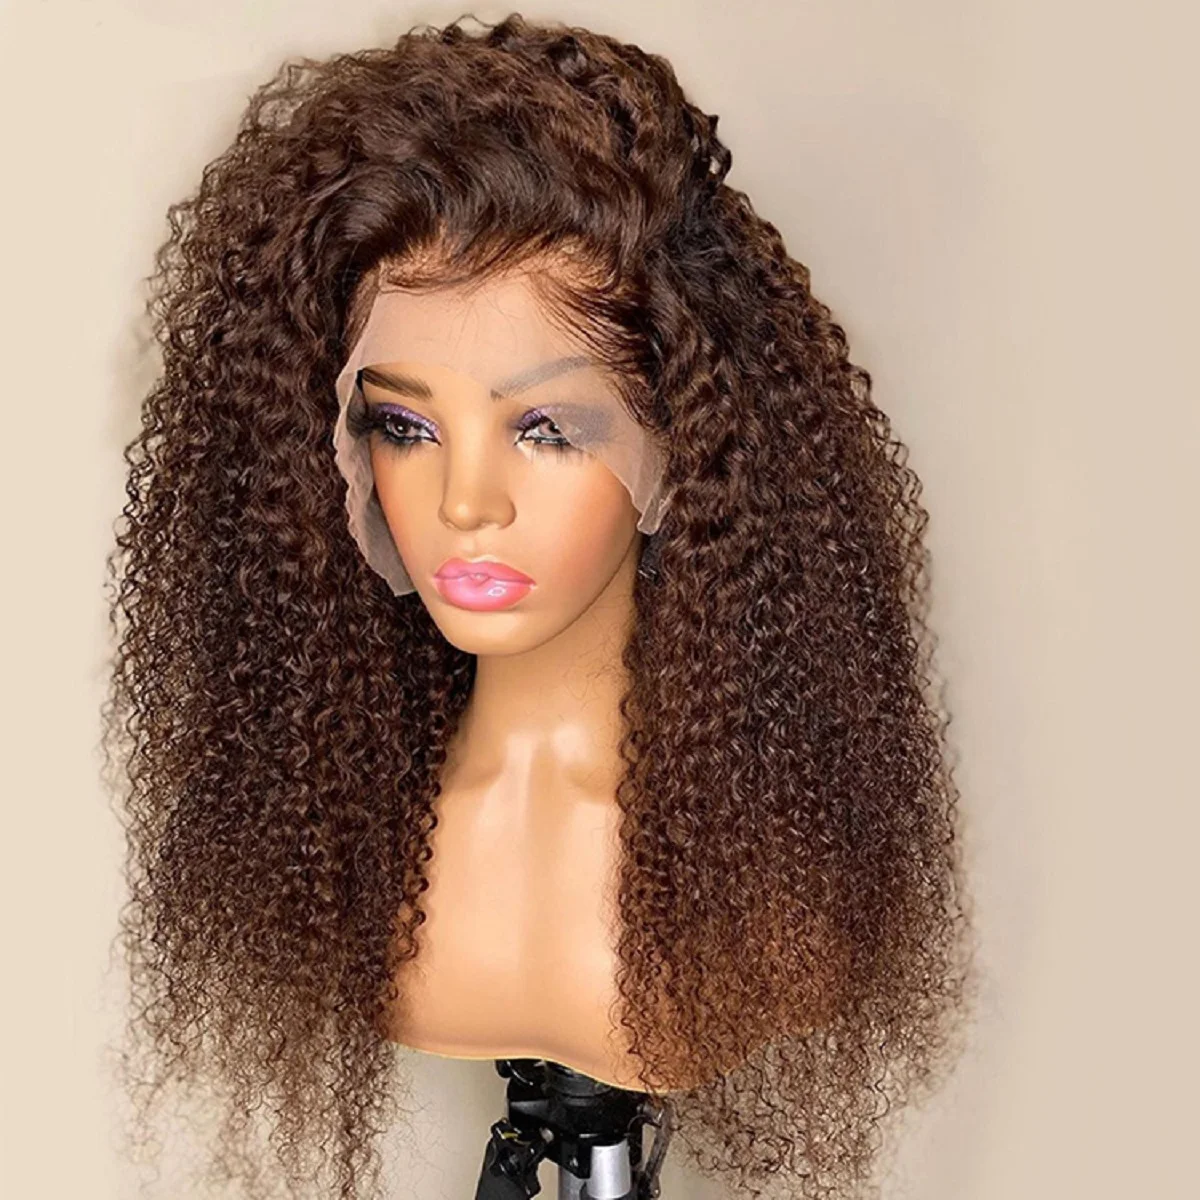 Dark Brown Kinky Curly 13x4 Lace Frontal Wigs Brazilian Remy Lace Front Human Hair Wigs Dark Brown 180% Density Full Curly Wigs